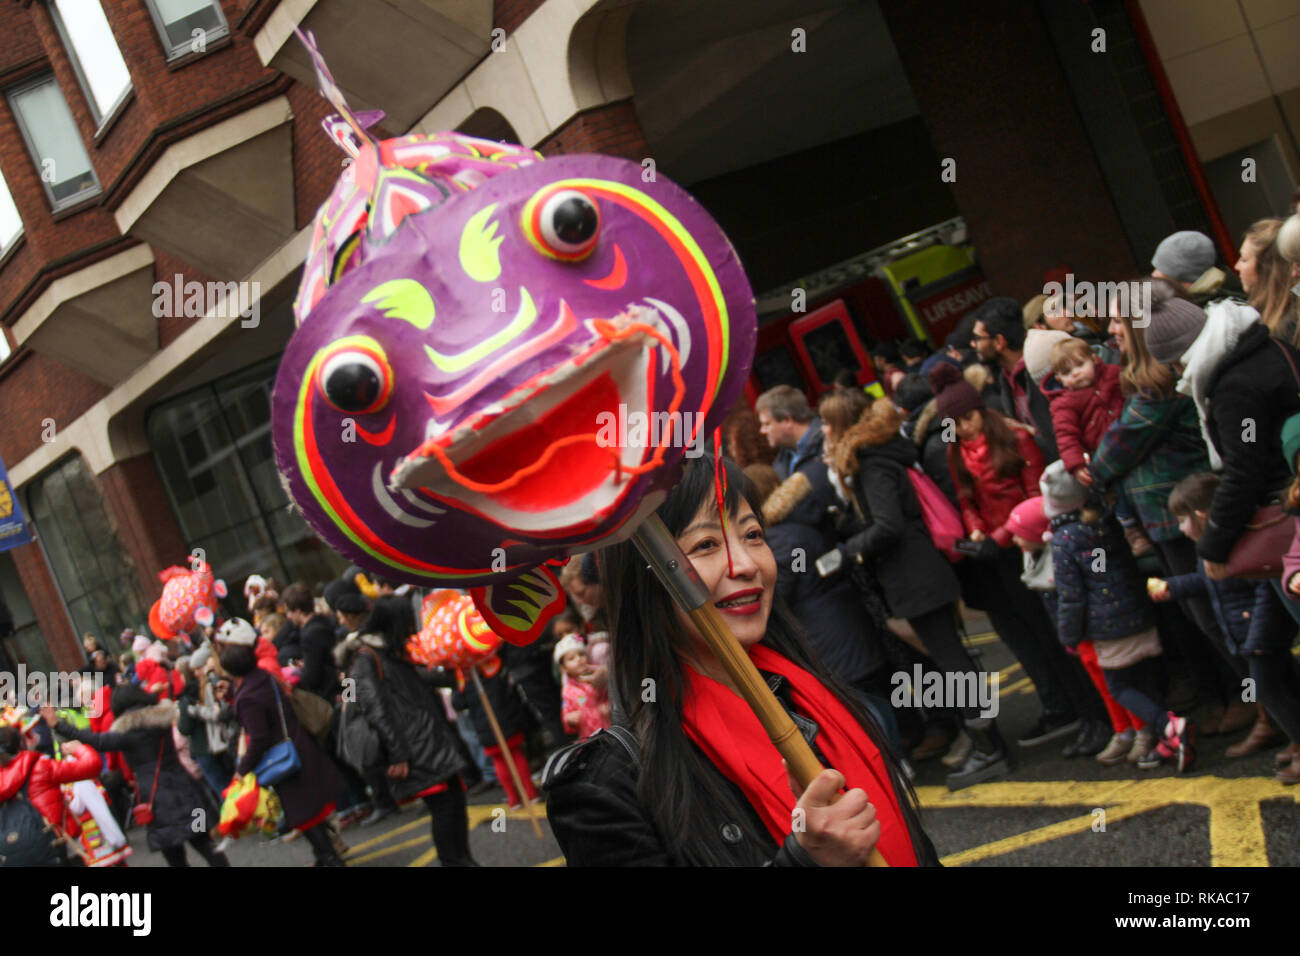 London, UK. 10th February 2019.  Hundreds of Londoners attend the Chinese New Year Celebration in Chinatown, central London to urse in the Year of the Pig. The event was organised by the London Chinatown Chinese Association (LCCA). Photo by David Mbiyu/ Alamy Live News Credit: david mbiyu/Alamy Live News Stock Photo